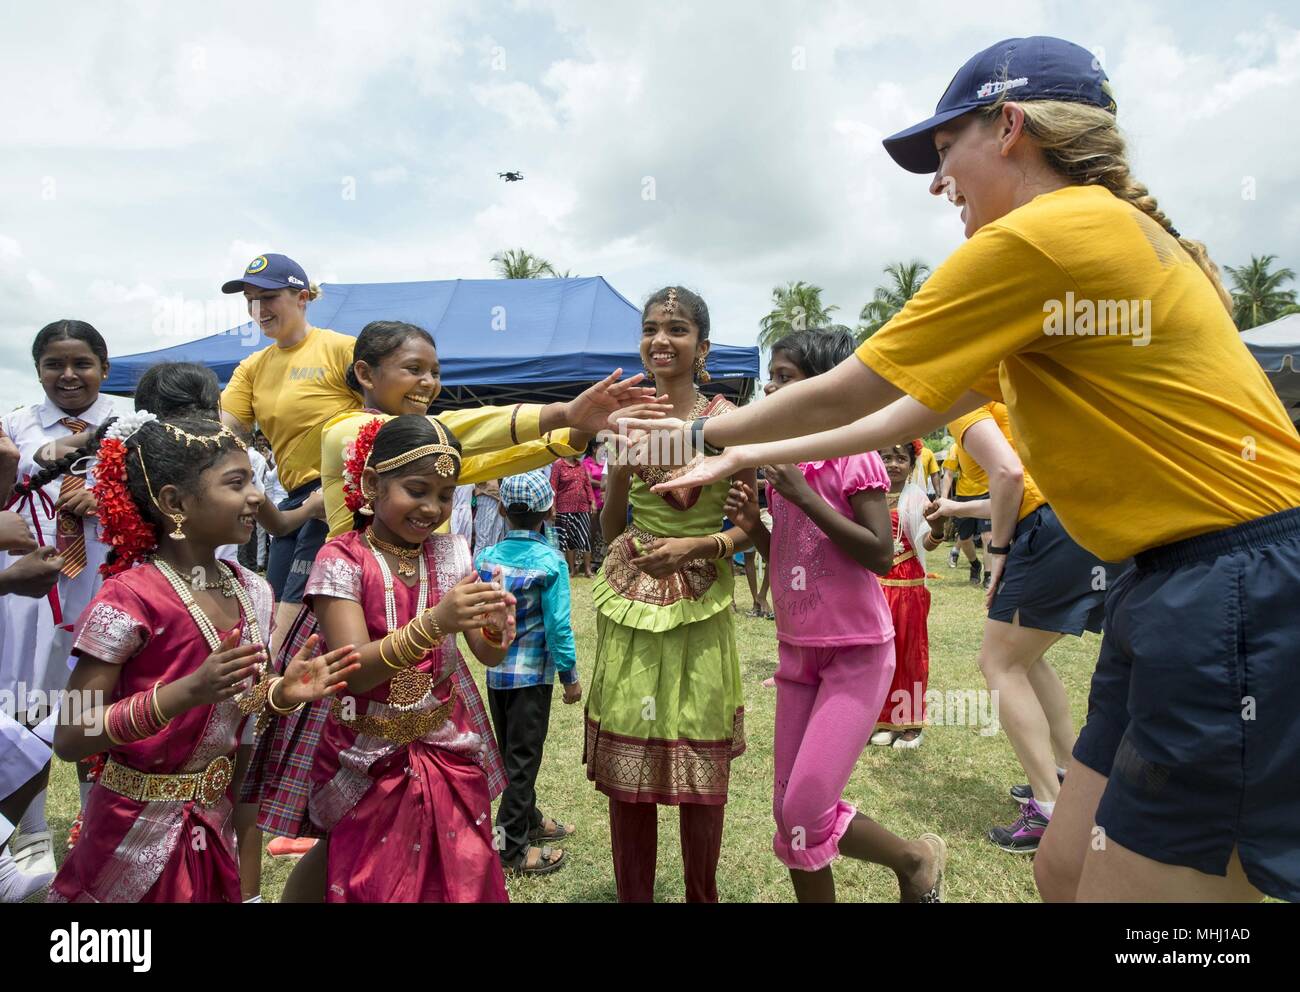 180428-N-MD713-0028 TRINCOMOLEE, Sri Lanka (April 28, 2018) Sailors assigned to Military Sealift Command hospital ship USNS Mercy (T-AH 19) dance with students from T/mu/Paddithidal Maha Vidyalayam School during a U.S. Pacific Fleet Band performance in support of Pacific Partnership 2018 (PP18), April 28, 2018. PP18's mission is to work collectively with host and partner nations to enhance regional interoperability and disaster response capabilities, increase stability and security in the region, and foster new and enduring friendships across the Indo-Pacific Region. Pacific Partnership, now i Stock Photo